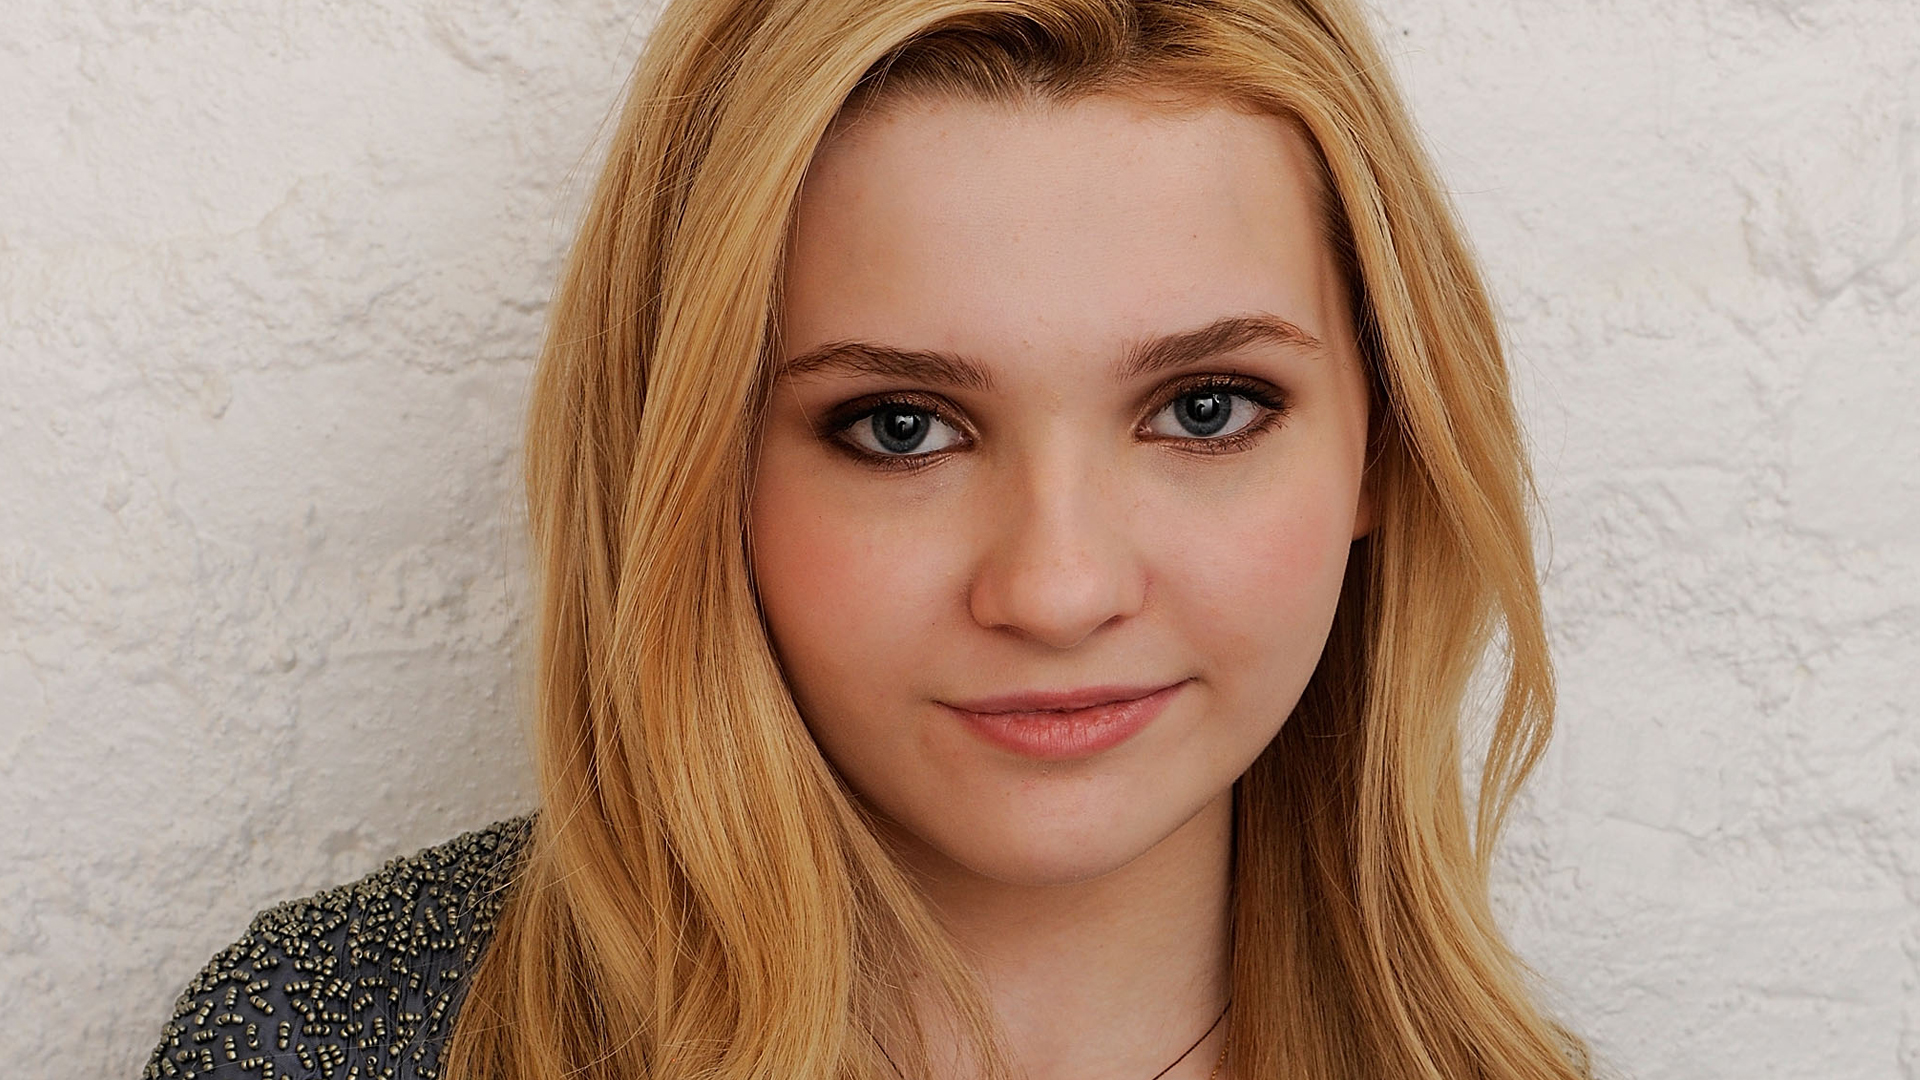 Rori- younger sister of Nox's best friend (Face claim = Abigail Breslin) abigail